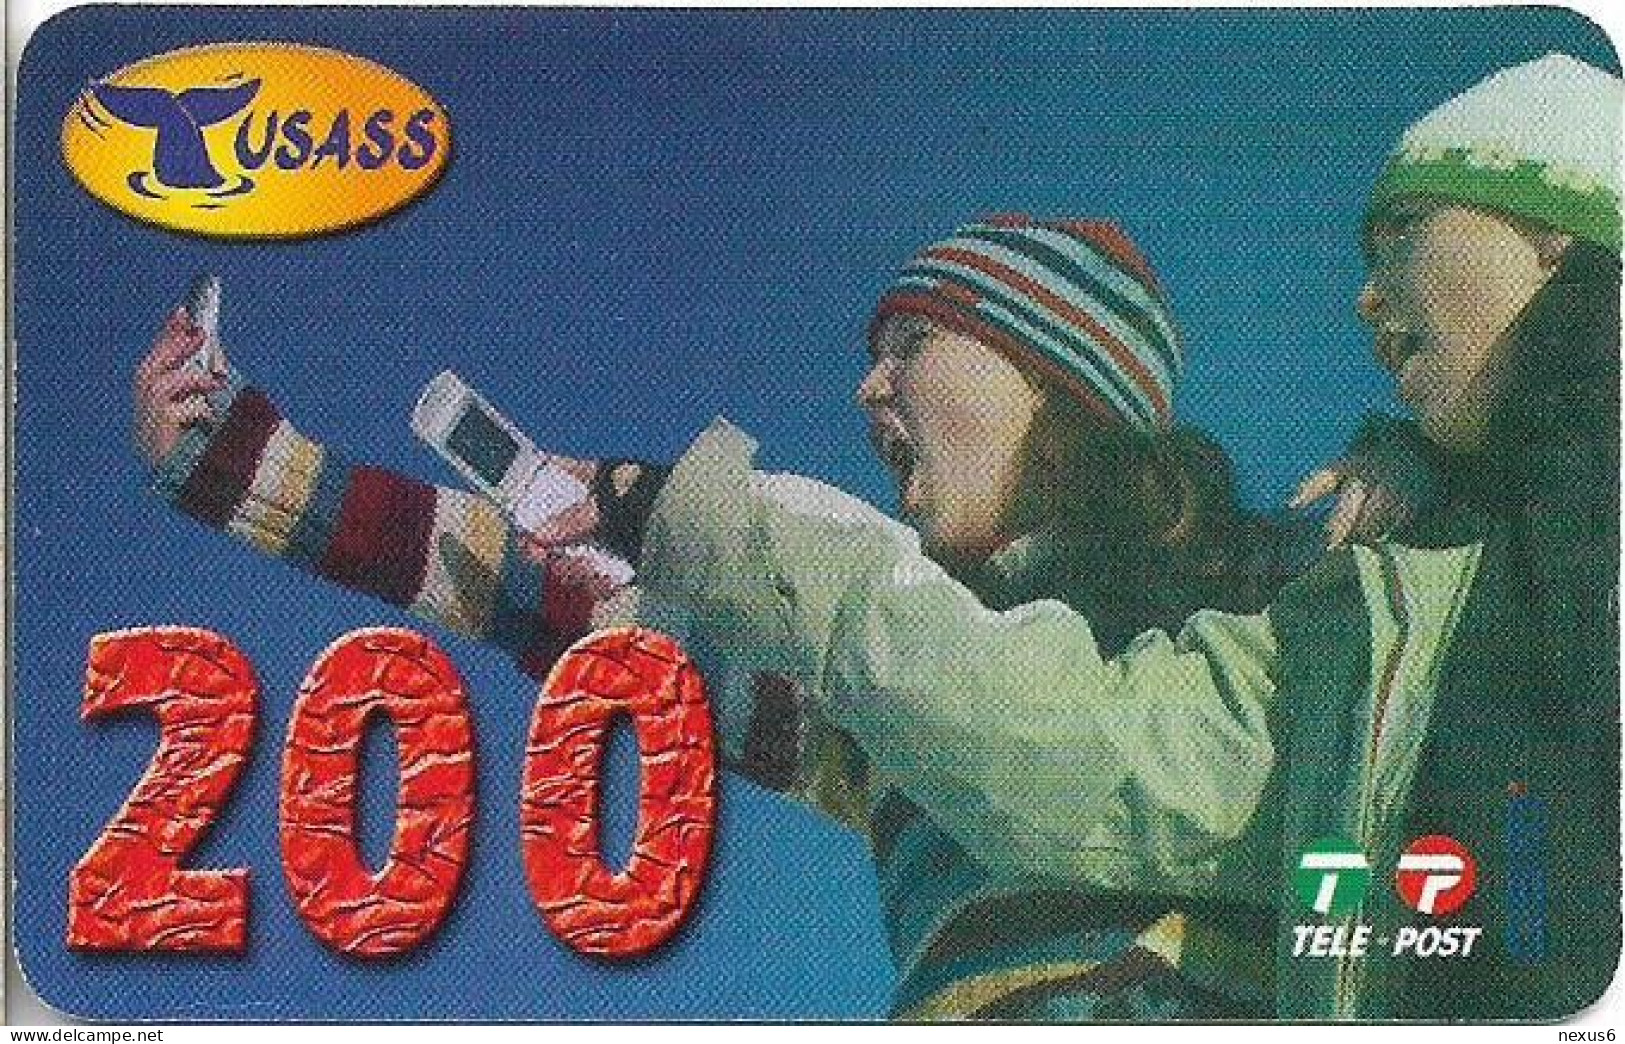 Greenland - Tusass - Two Girls With Mobile, GSM Refill, 200kr. Exp. 04.02.2007, Used - Groenland